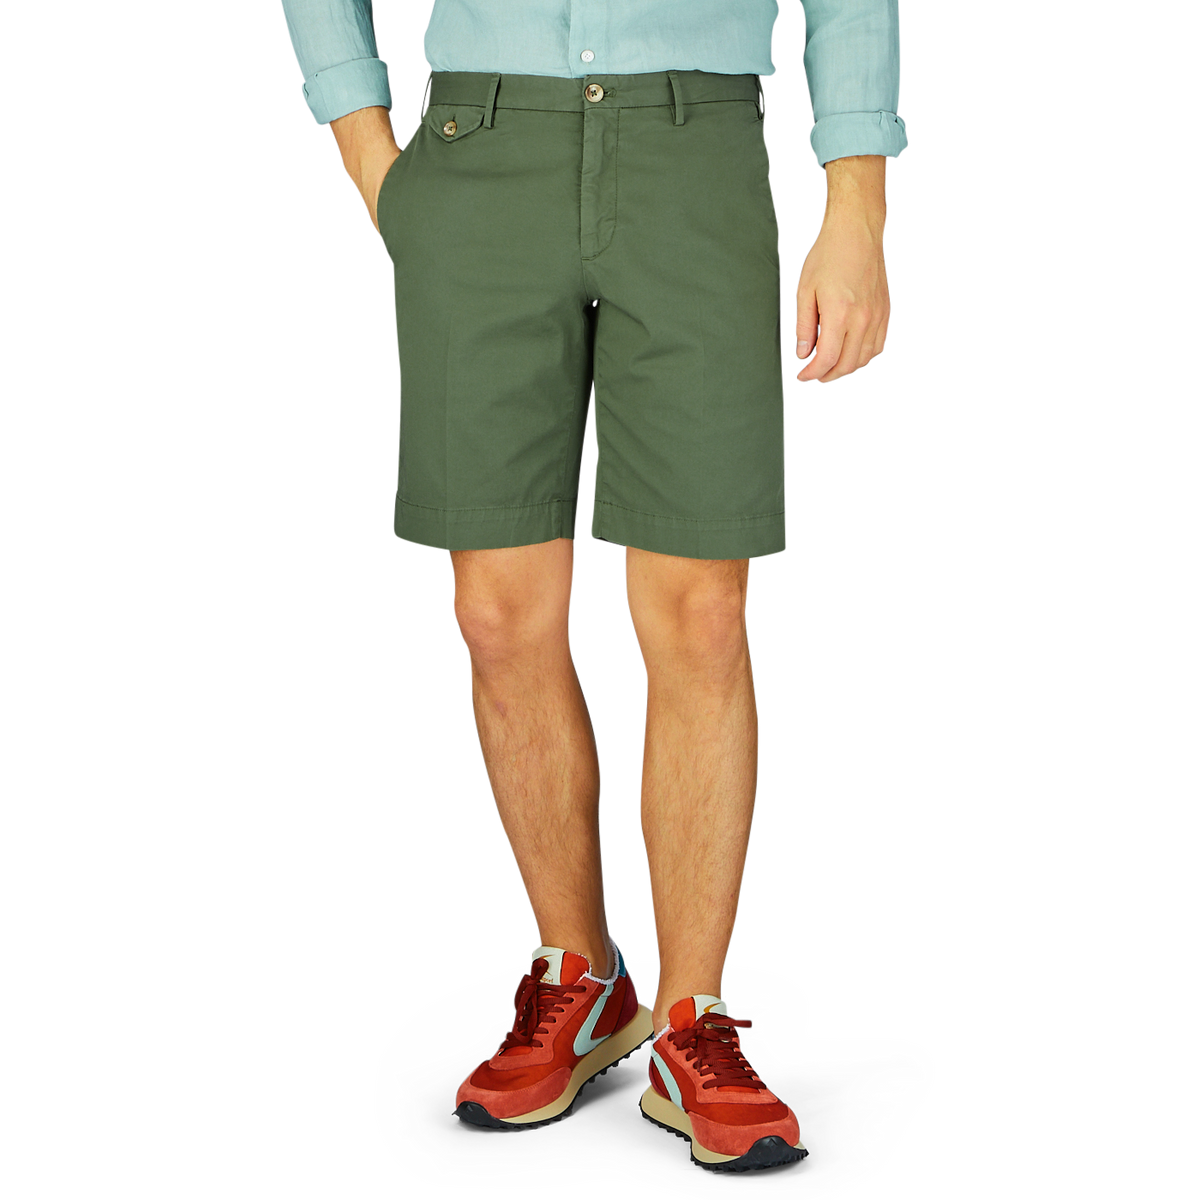 A person standing wearing Grass Green Cotton Royal Batavia Shorts by Incotex and sporty sneakers.